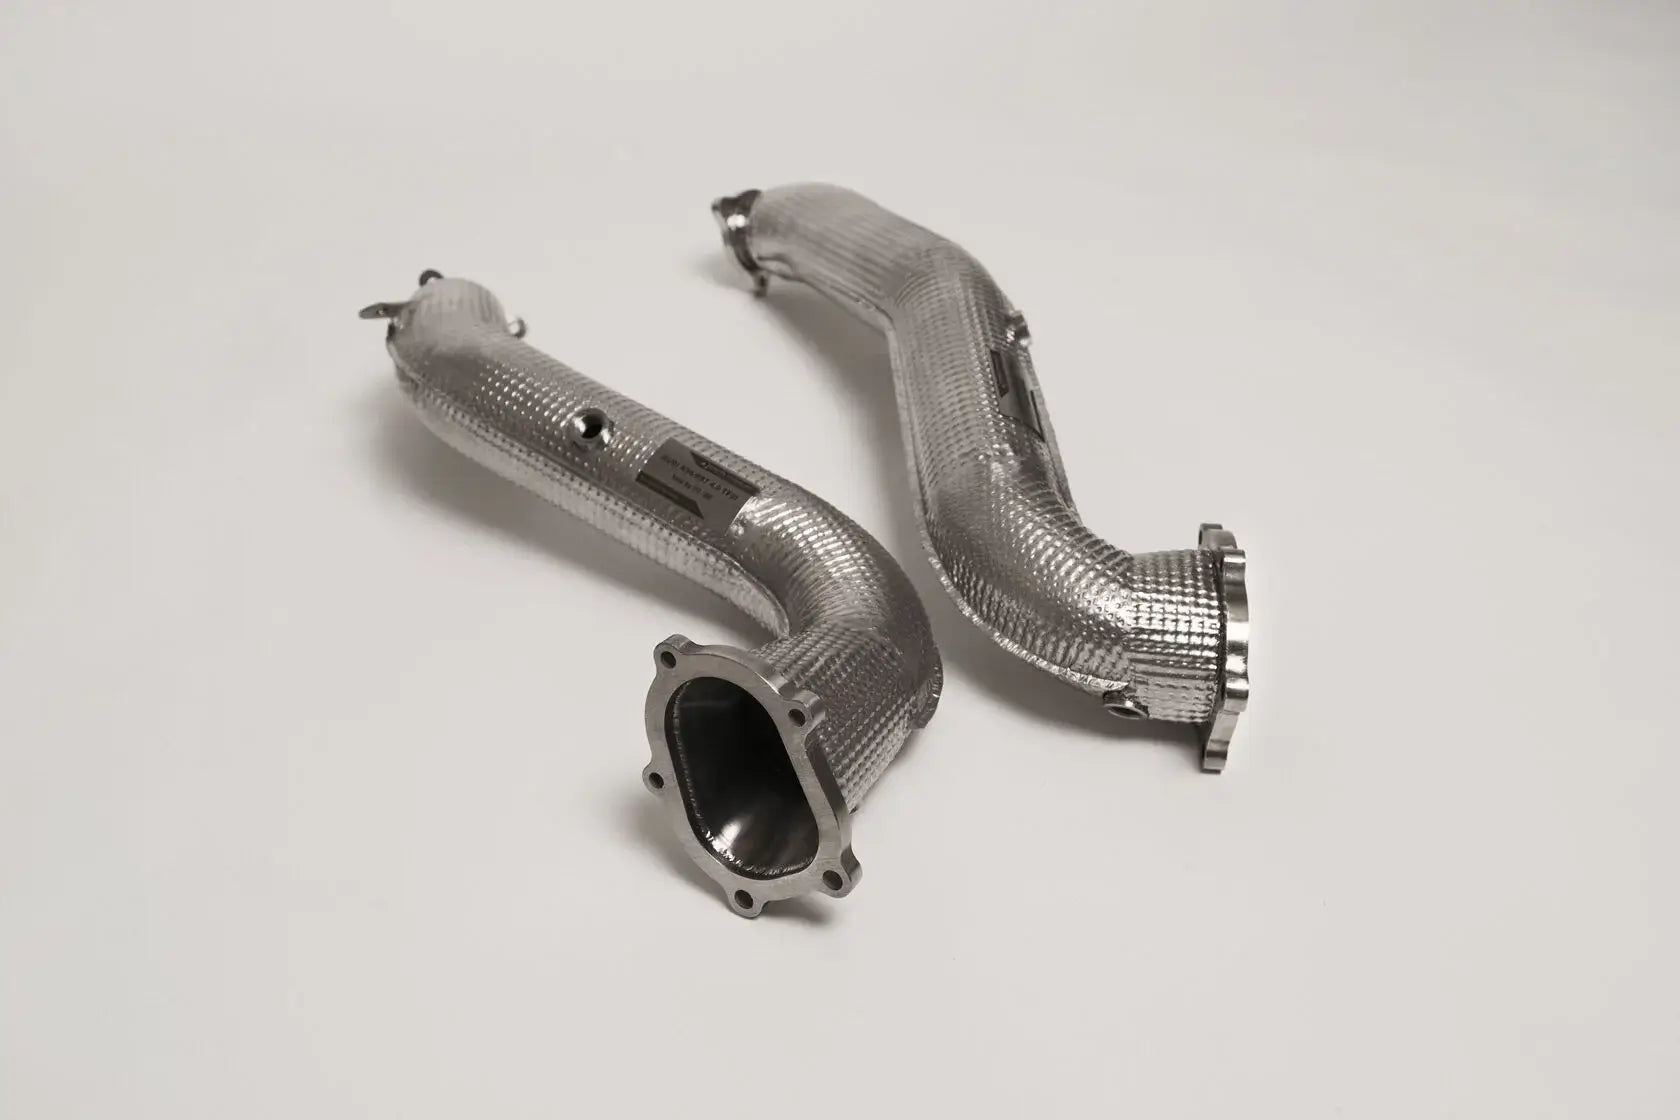 DEIKIN 10-AUDI.RS7.C7-DPT Downpipe for AUDI RS7 (C7) with thermal insulation HeatShield Photo-2 